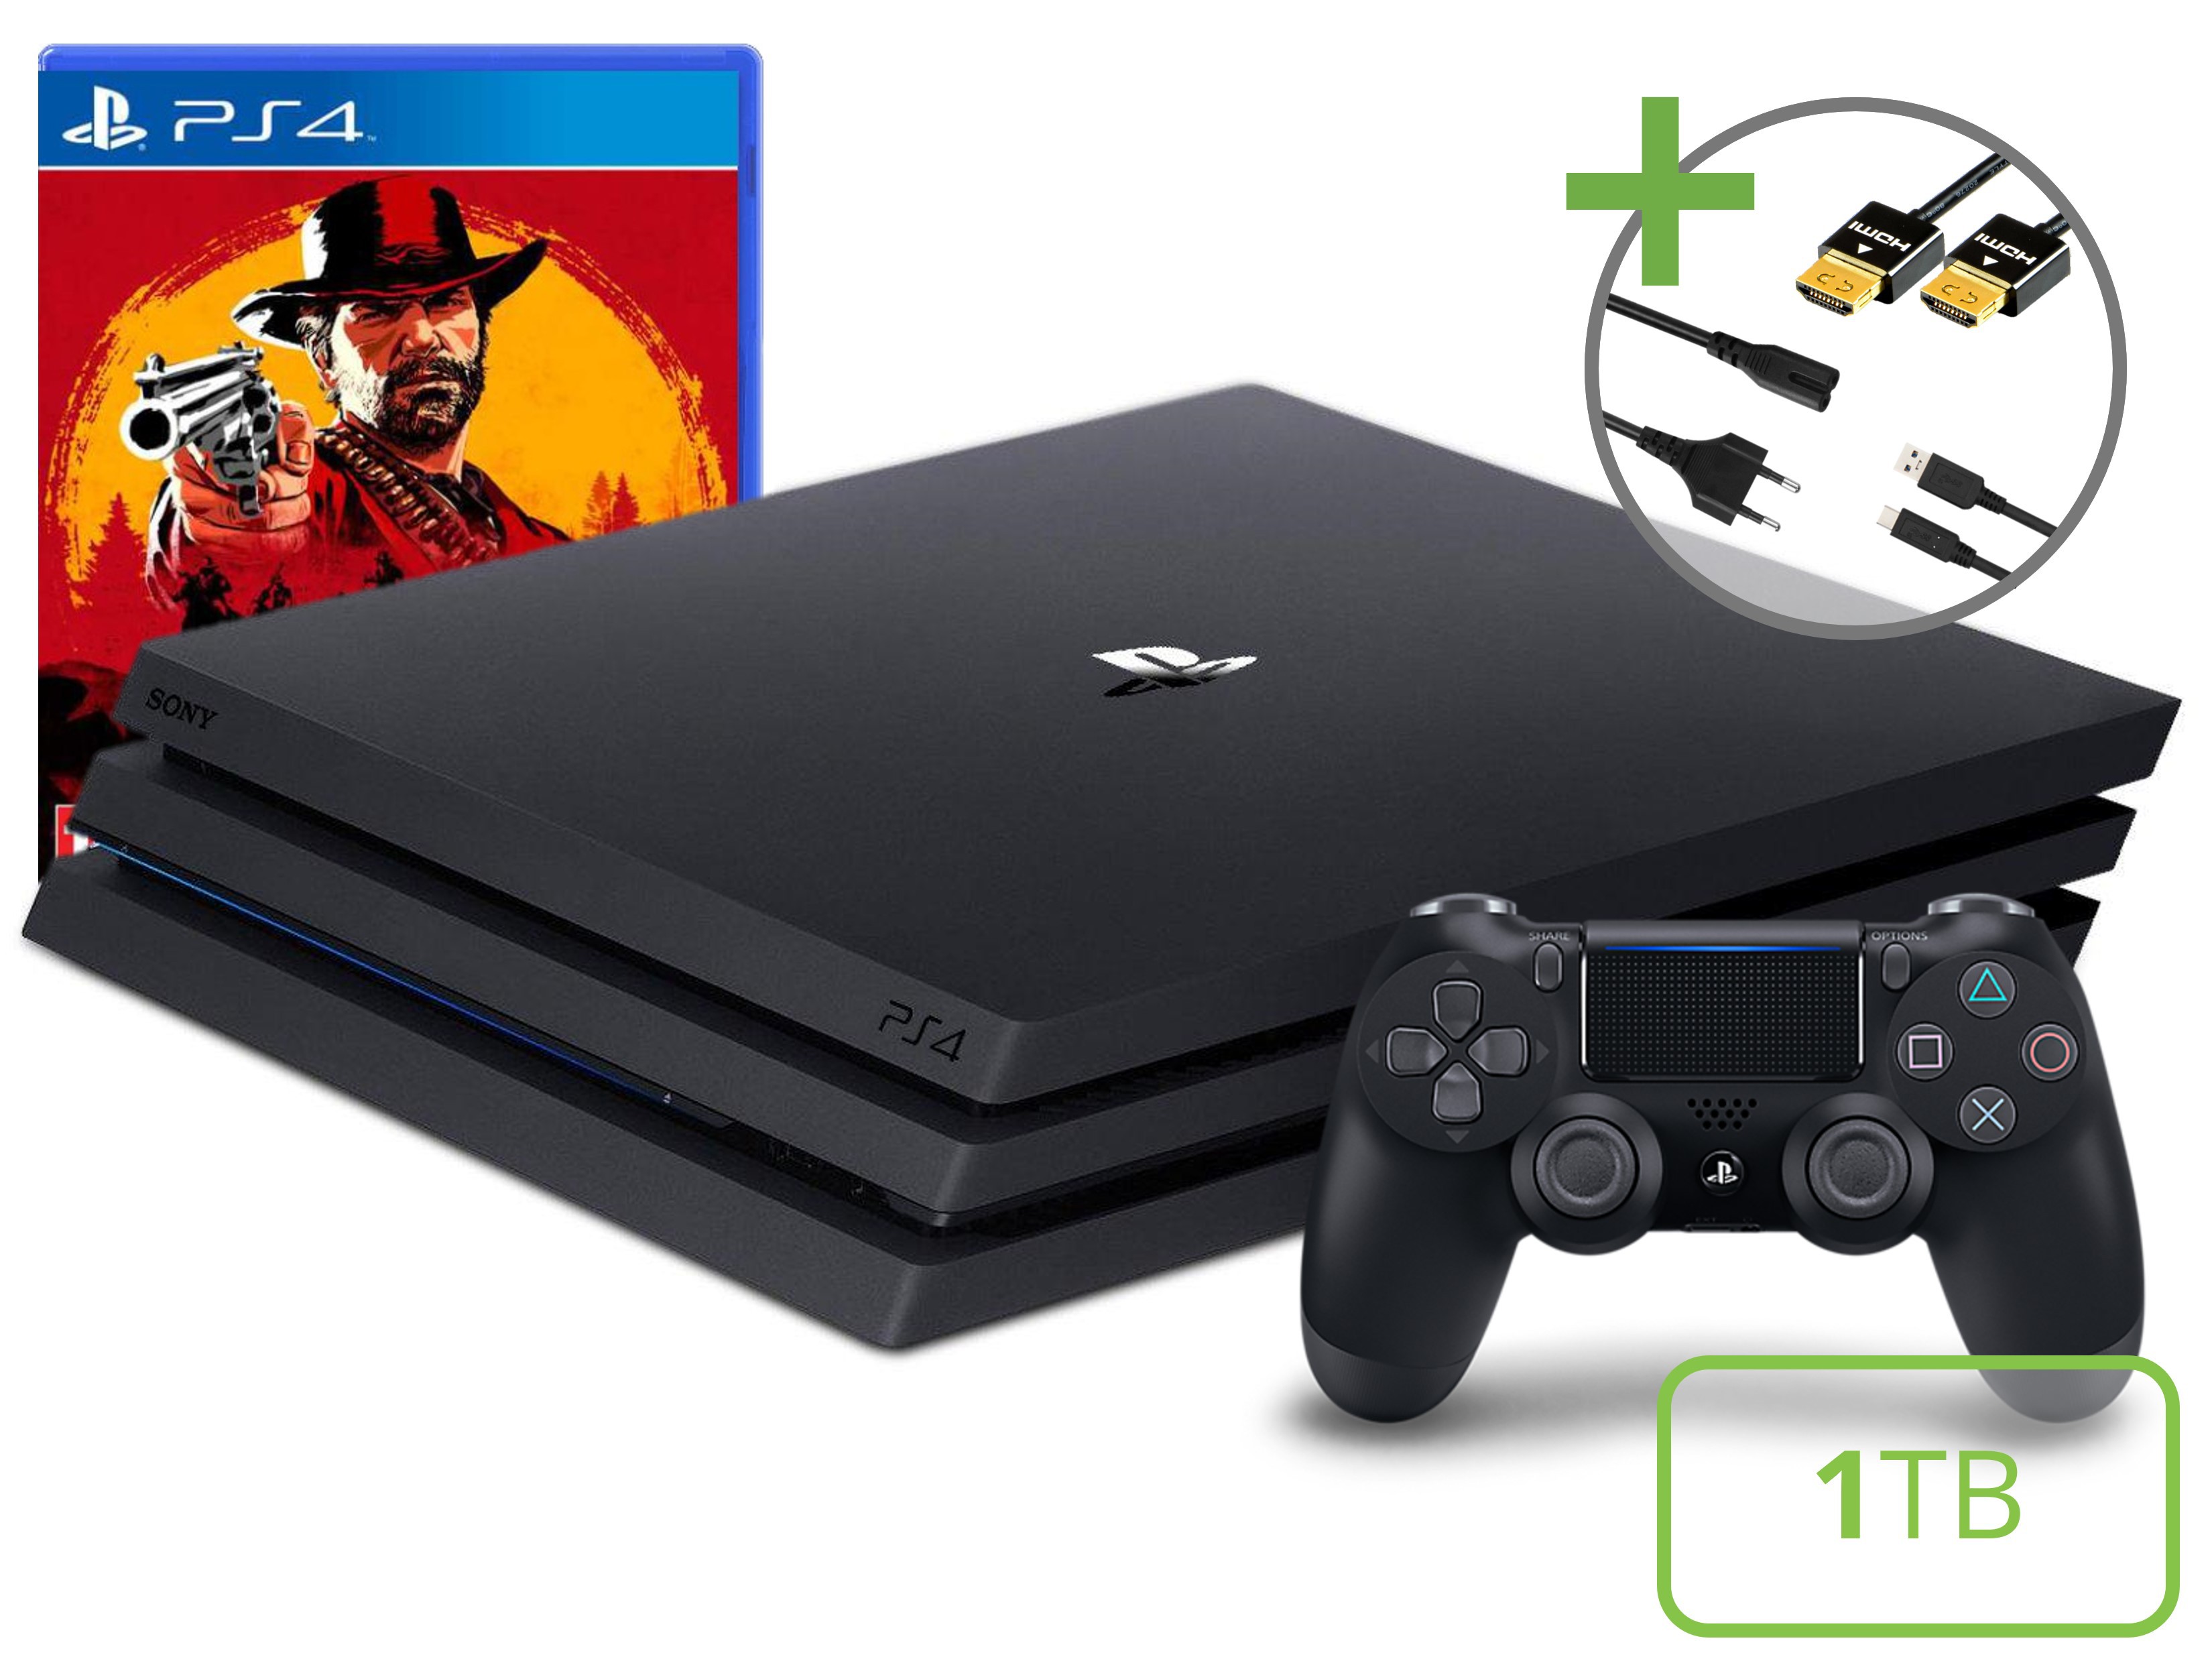 Sony PlayStation 4 Pro Starter Pack - 1TB Red Dead Redemption 2 Edition - Playstation 4 Hardware